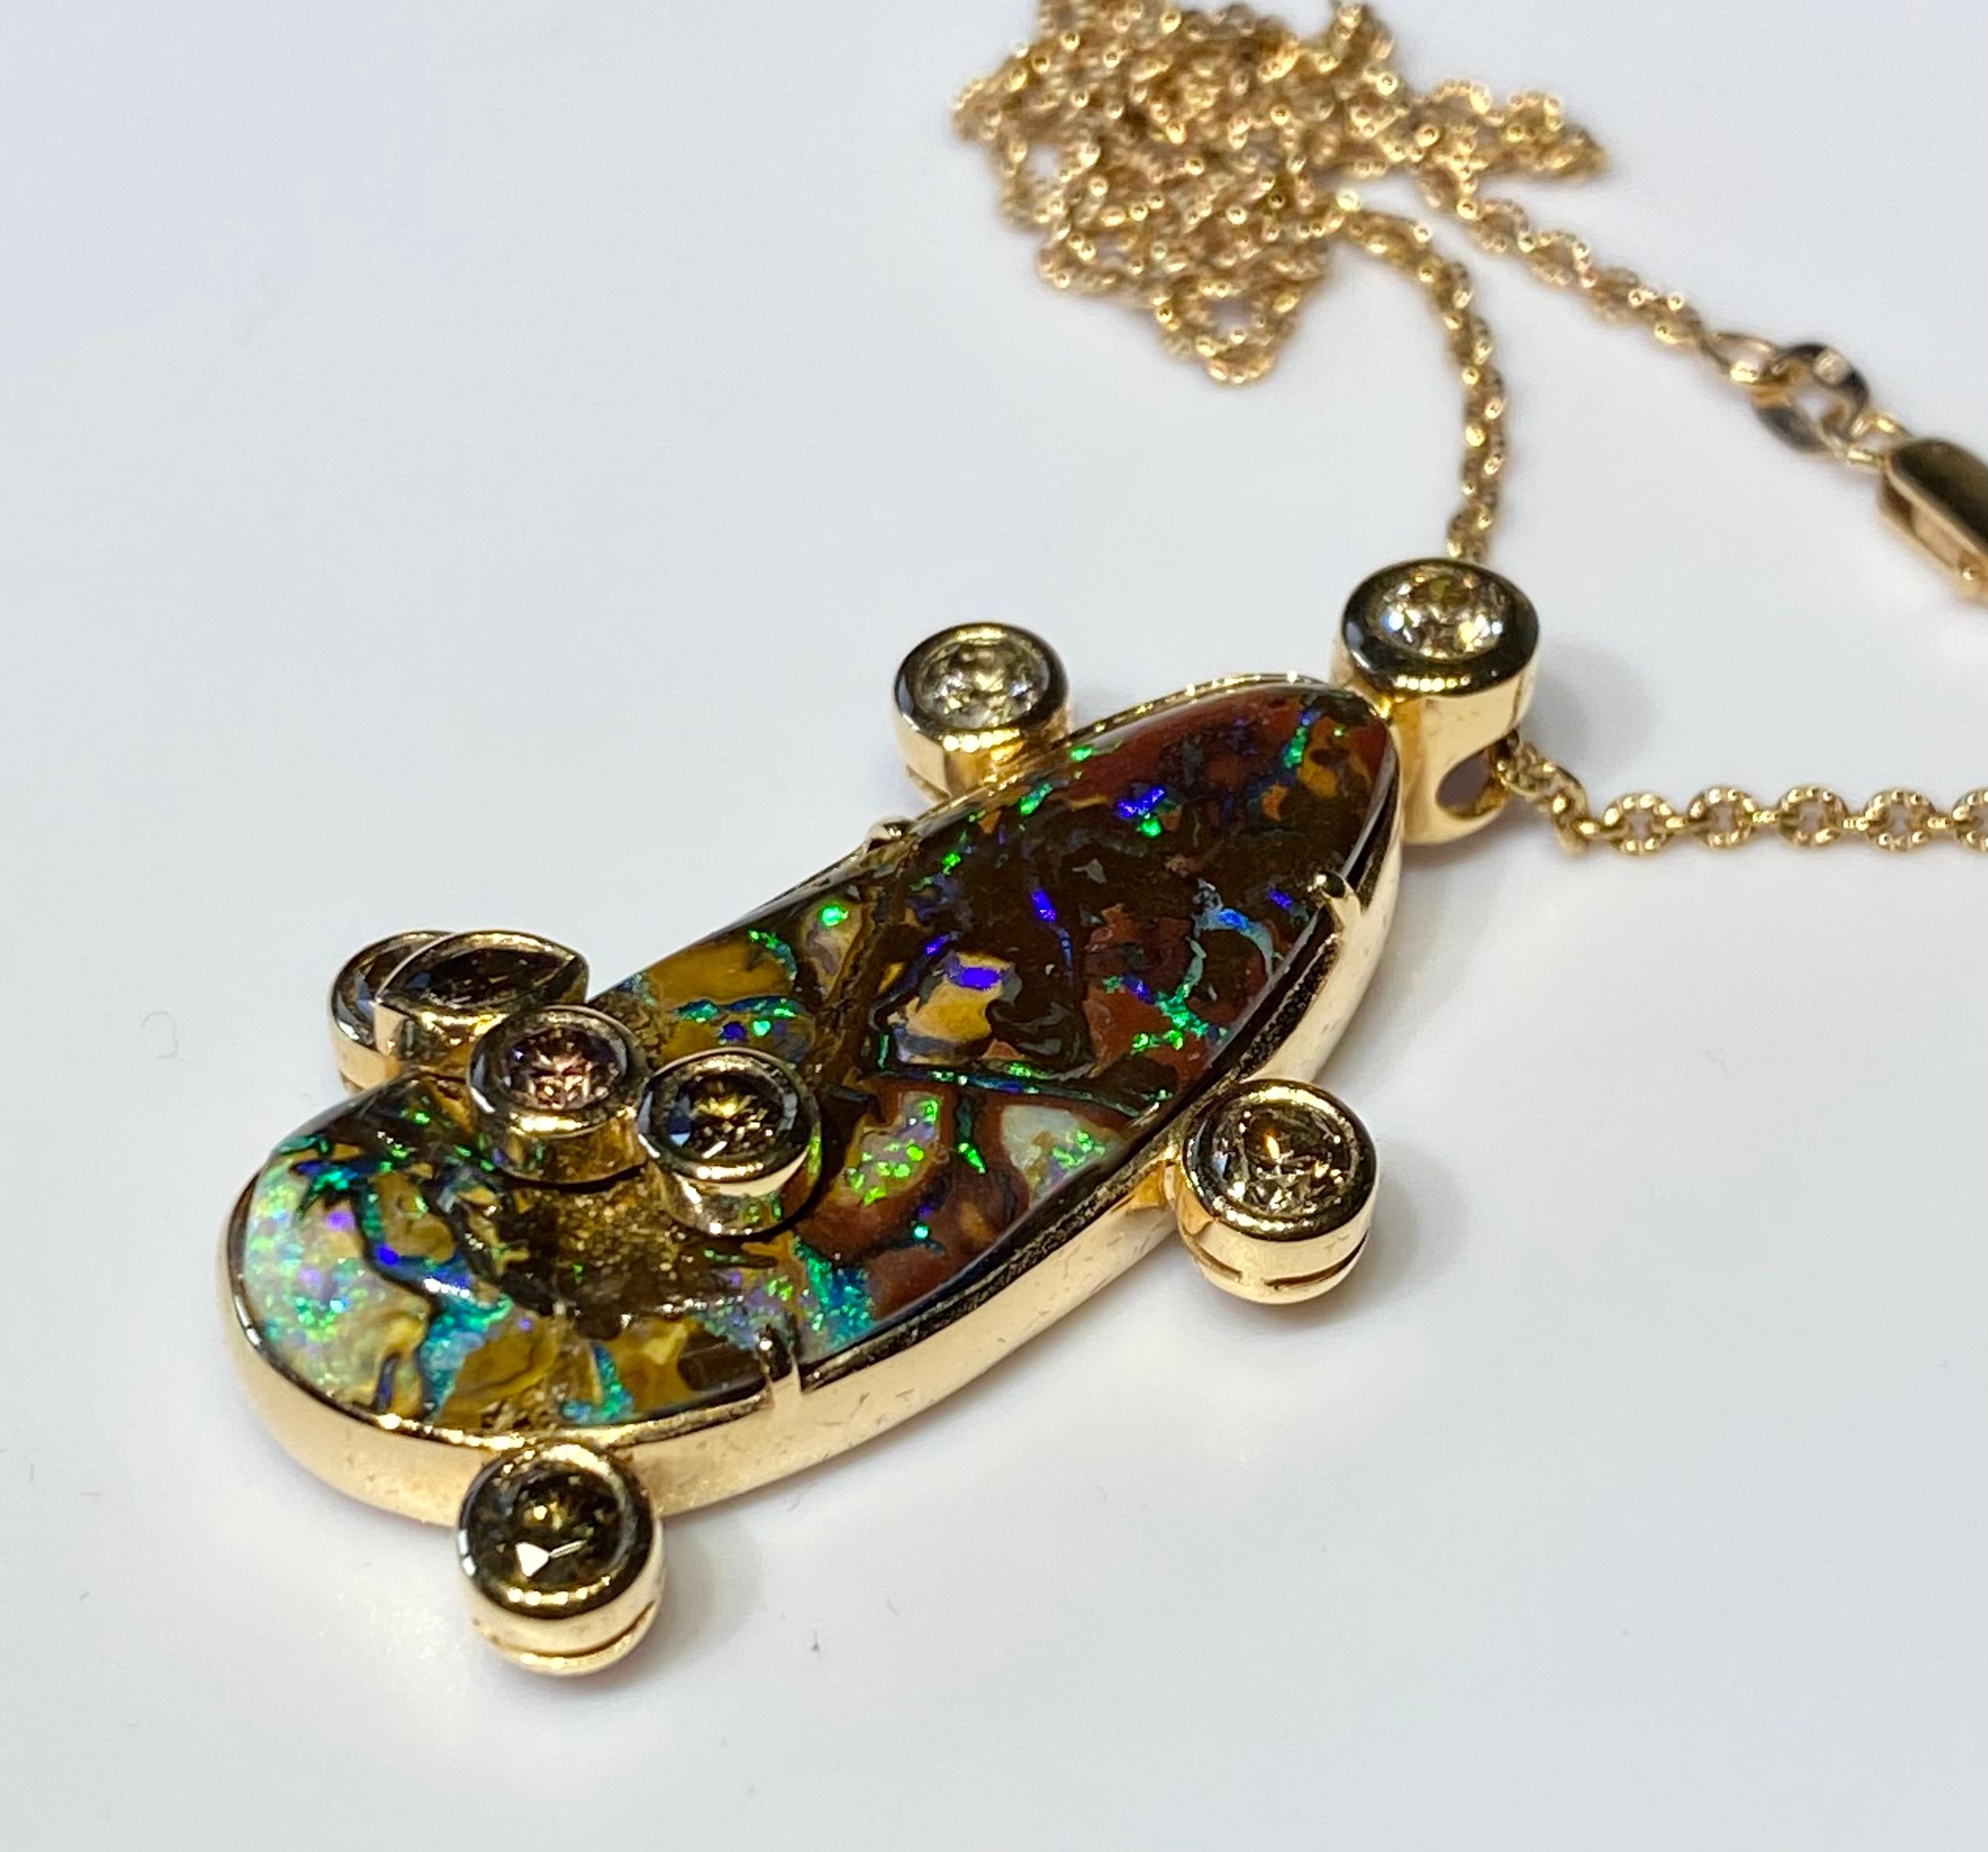 18kt Rose Gold Pendant with Cognac Diamonds & Australian Boulder Opal Cabochon.
This Pendant is One and three quarter inches long by one inch wide and hangs on a 20 Inch Rose Gold Chain with a Lobster Claw Clasp.
18kt Rose Gold Weight 13 Grams (not